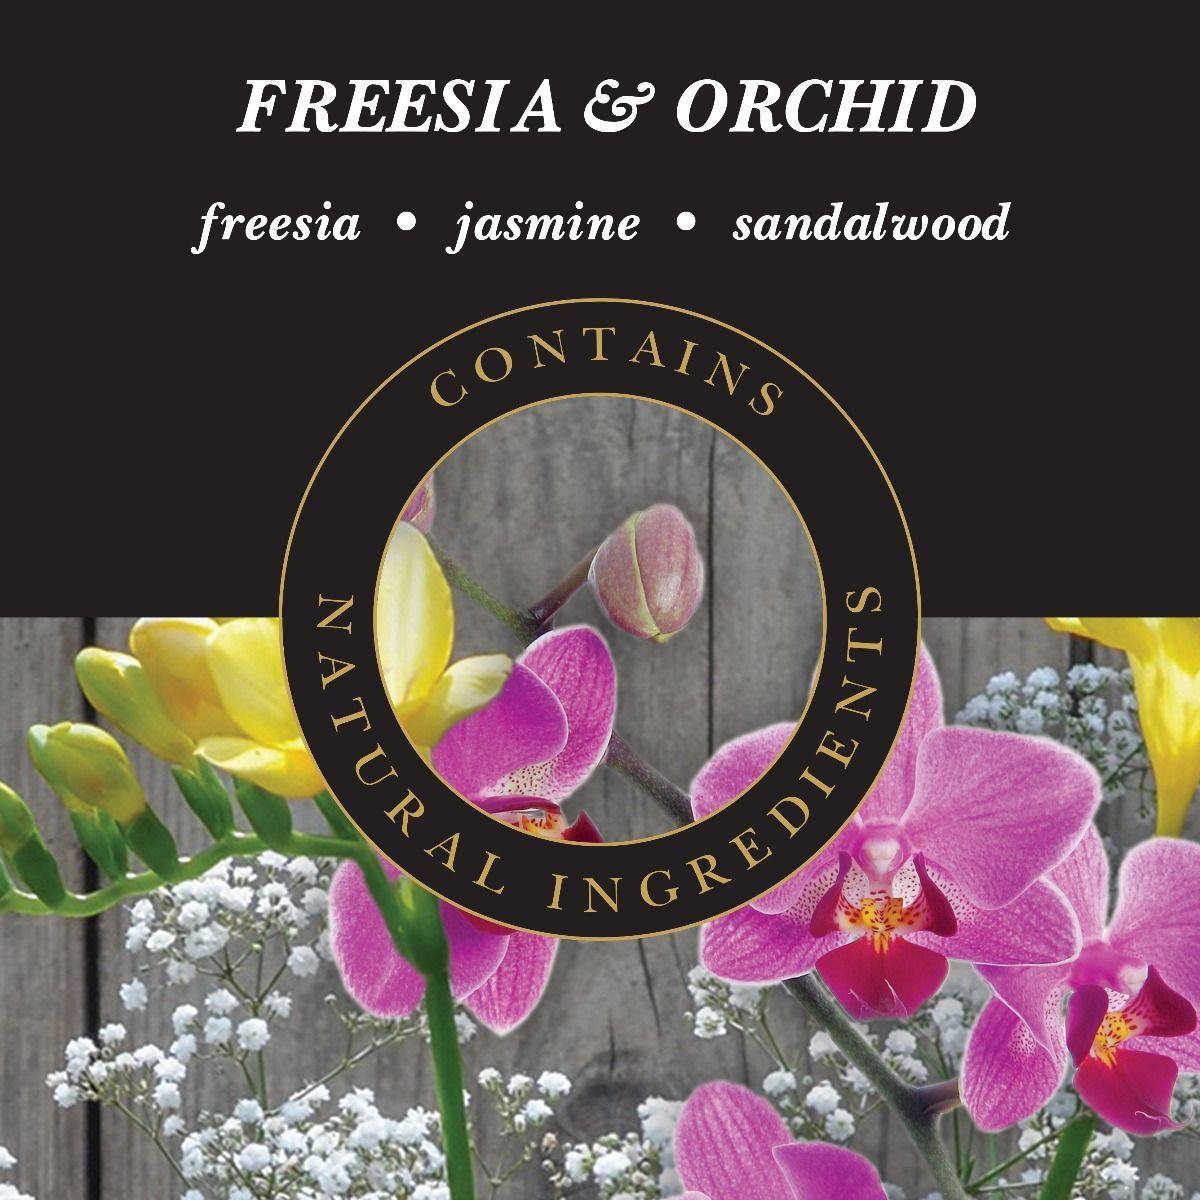 The Scented Home: Reed Diffuser - Freesia & Orchid Diffusers Foxyavenue UK